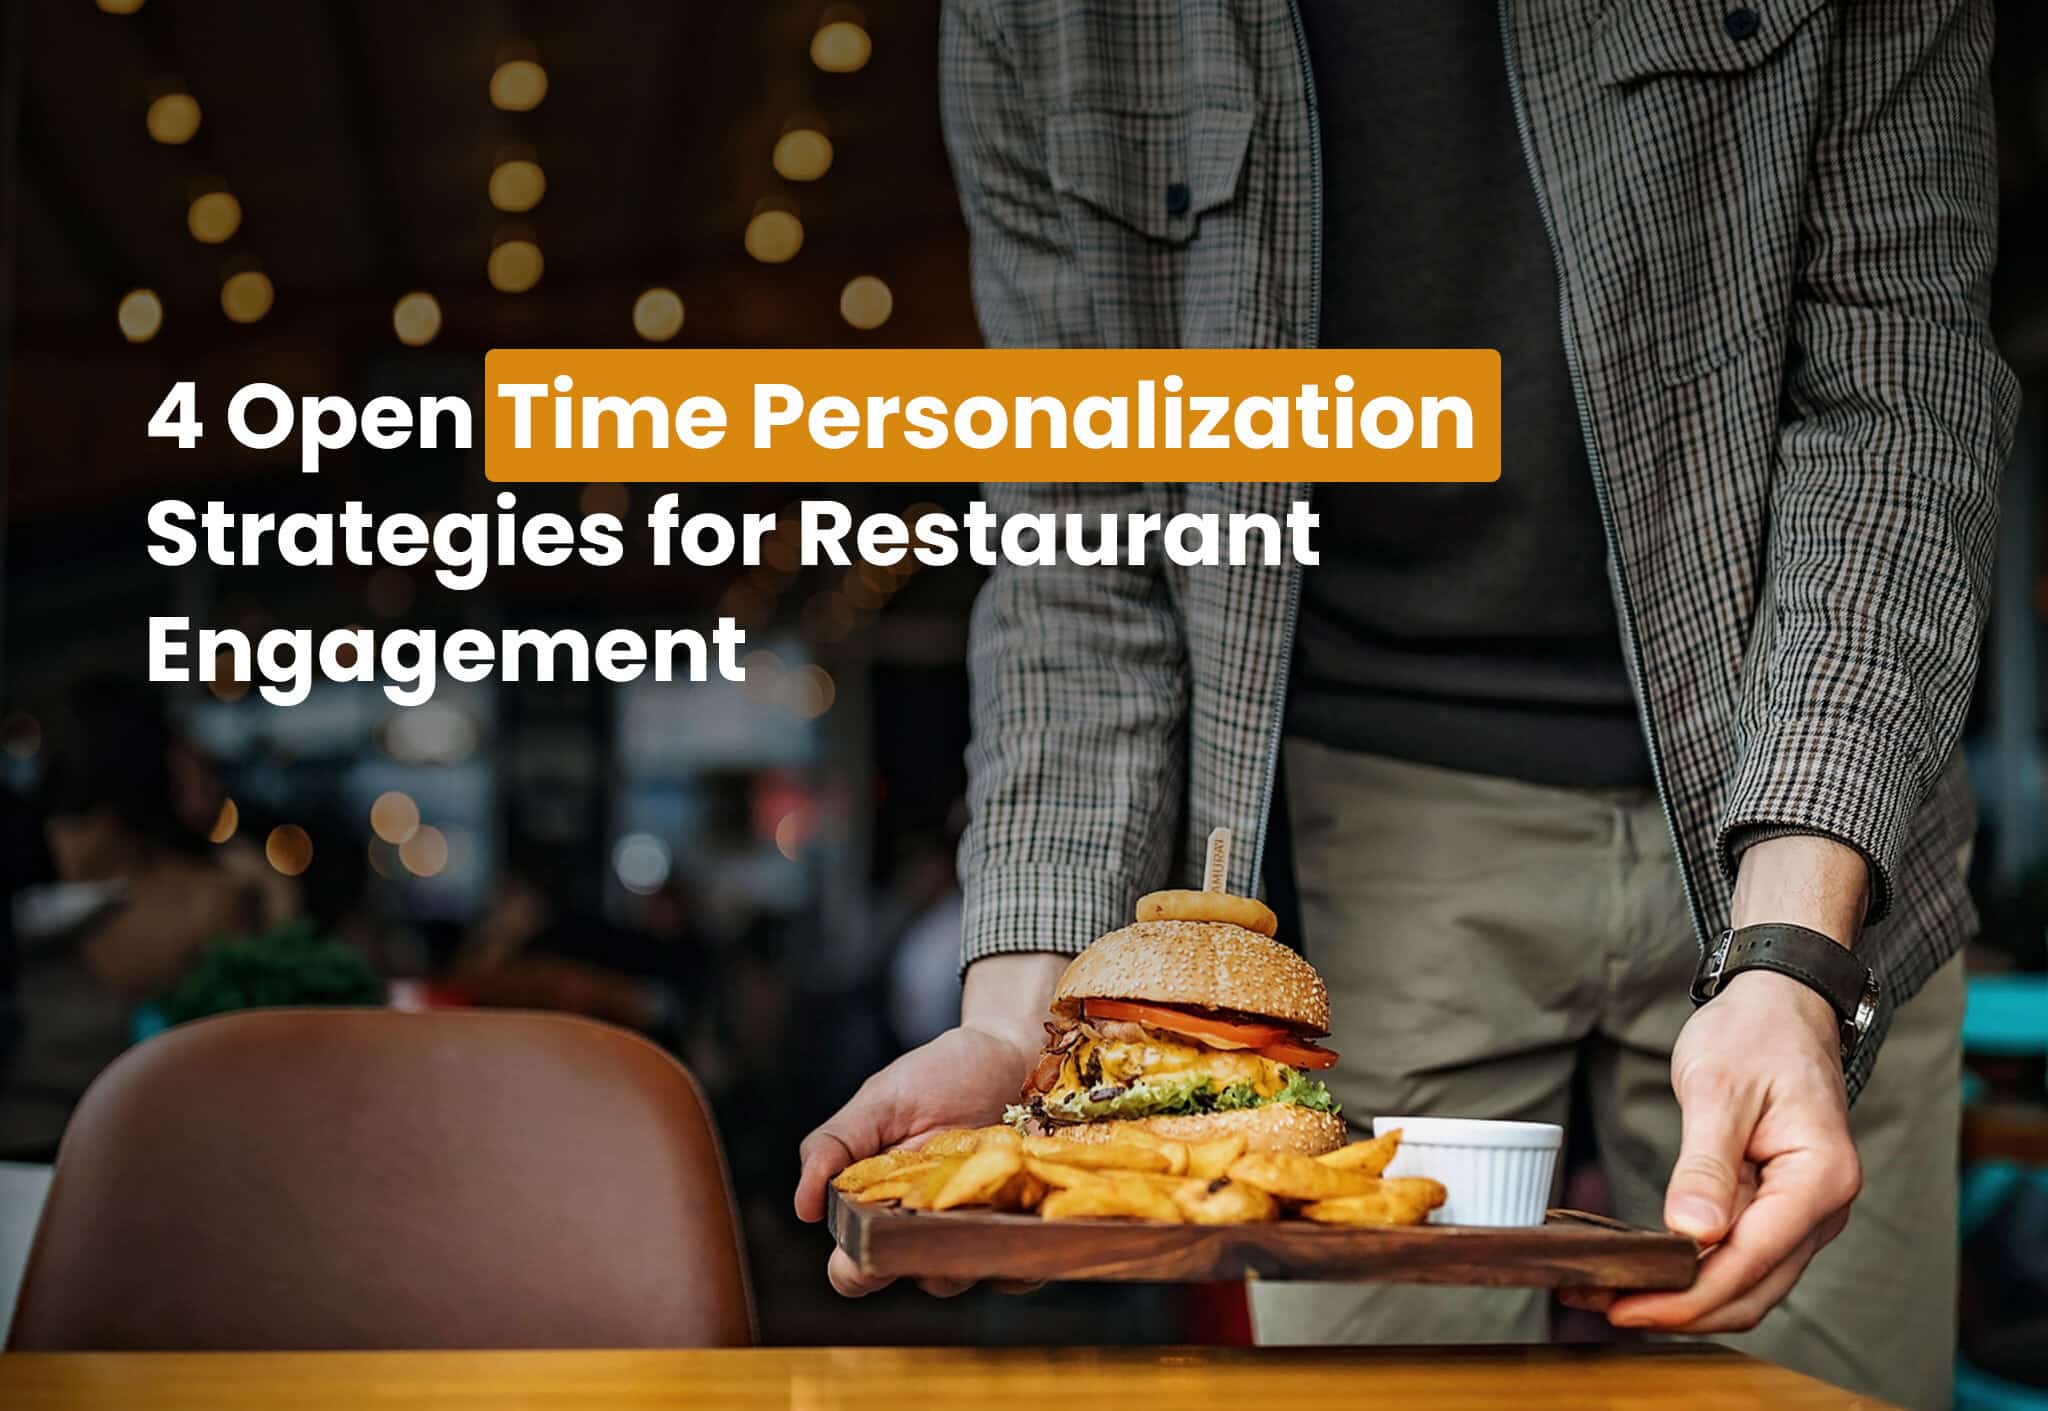 4 Open Time Personalization Strategies for Restaurant Engagement